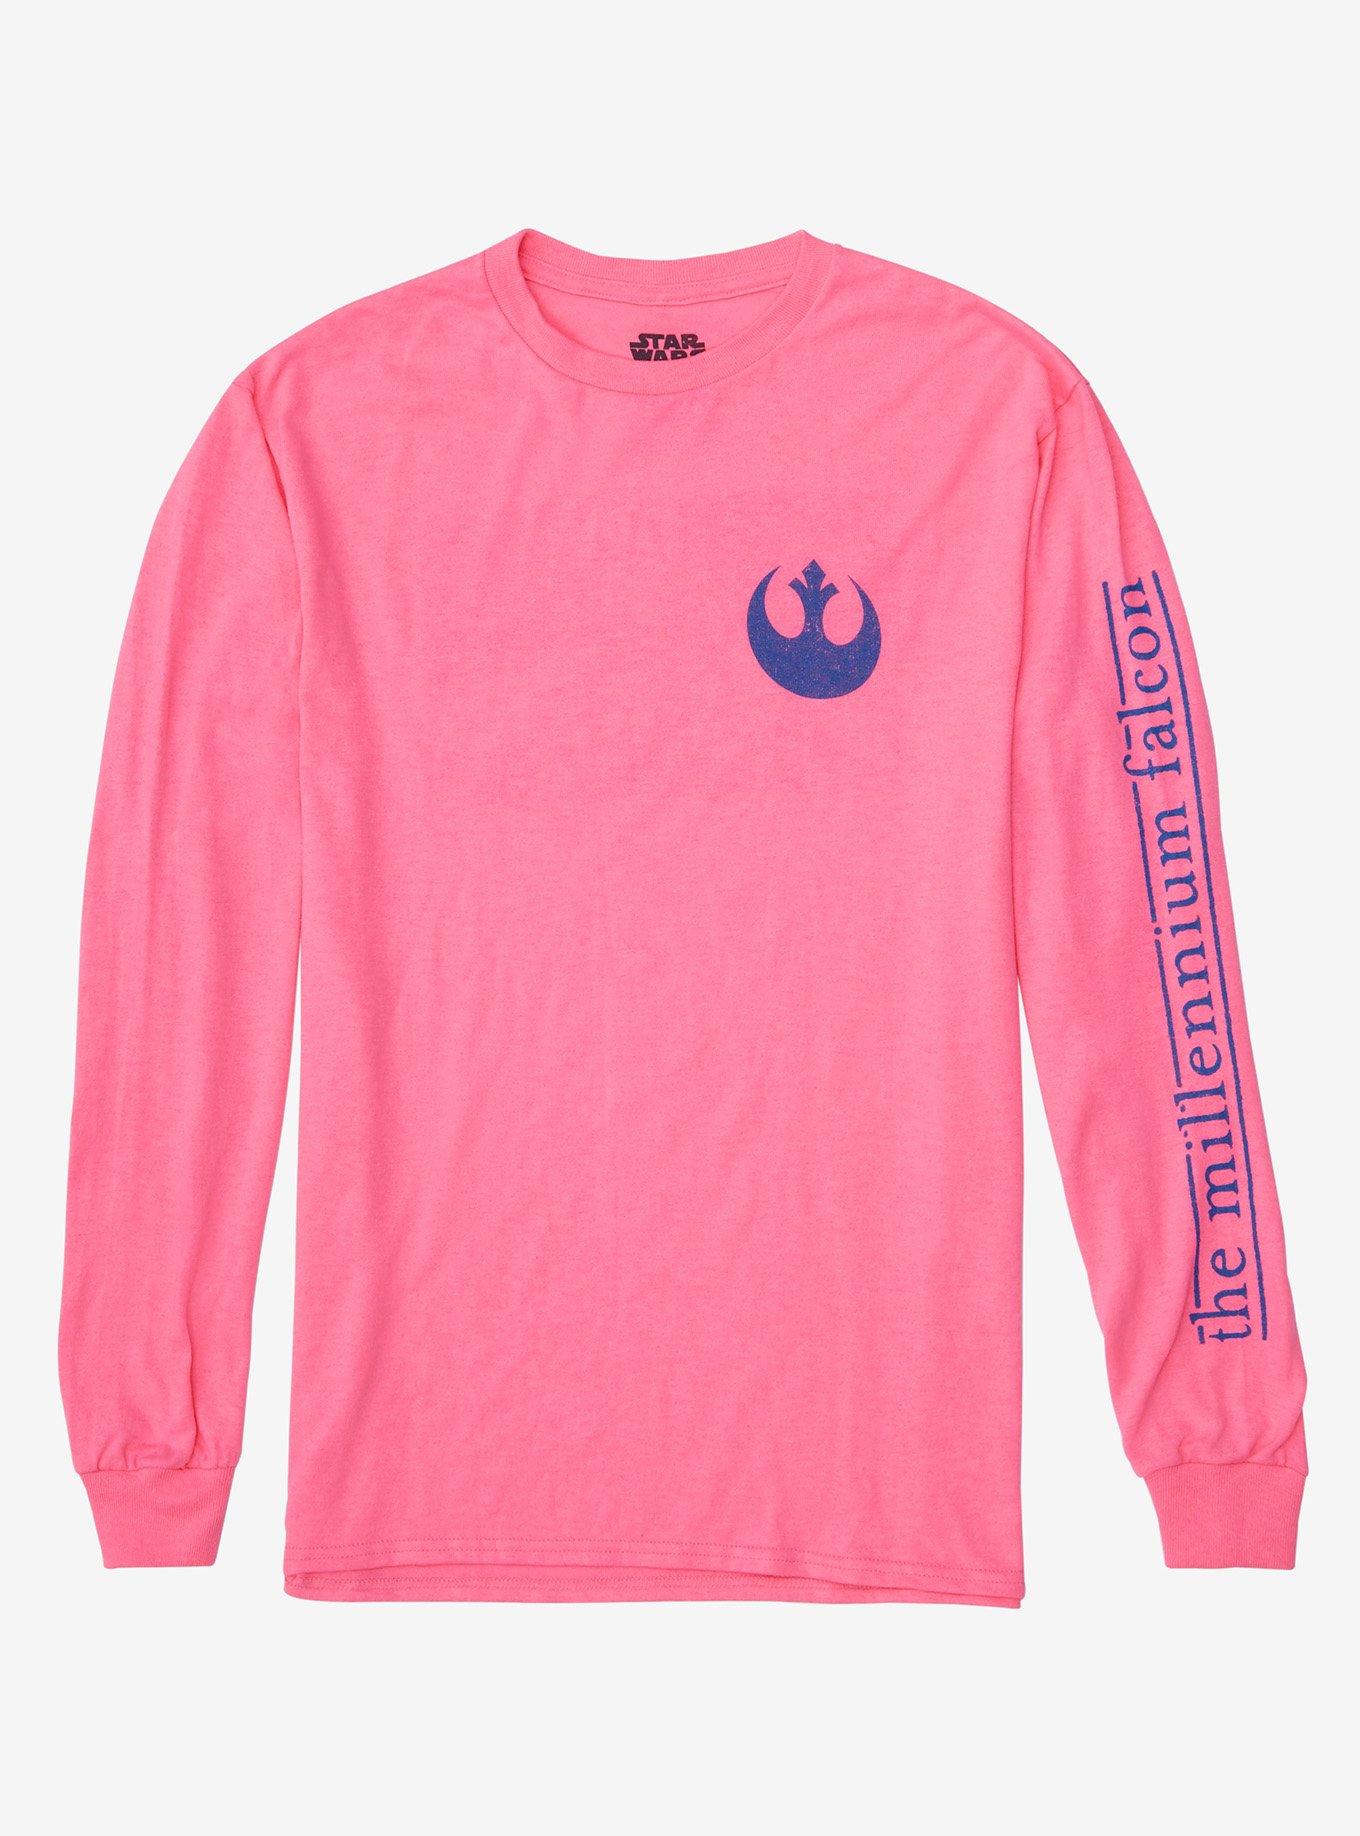 Star Wars Millennium Falcon Distressed Long Sleeve T-Shirt - BoxLunch Exclusive, LIGHT PINK, hi-res